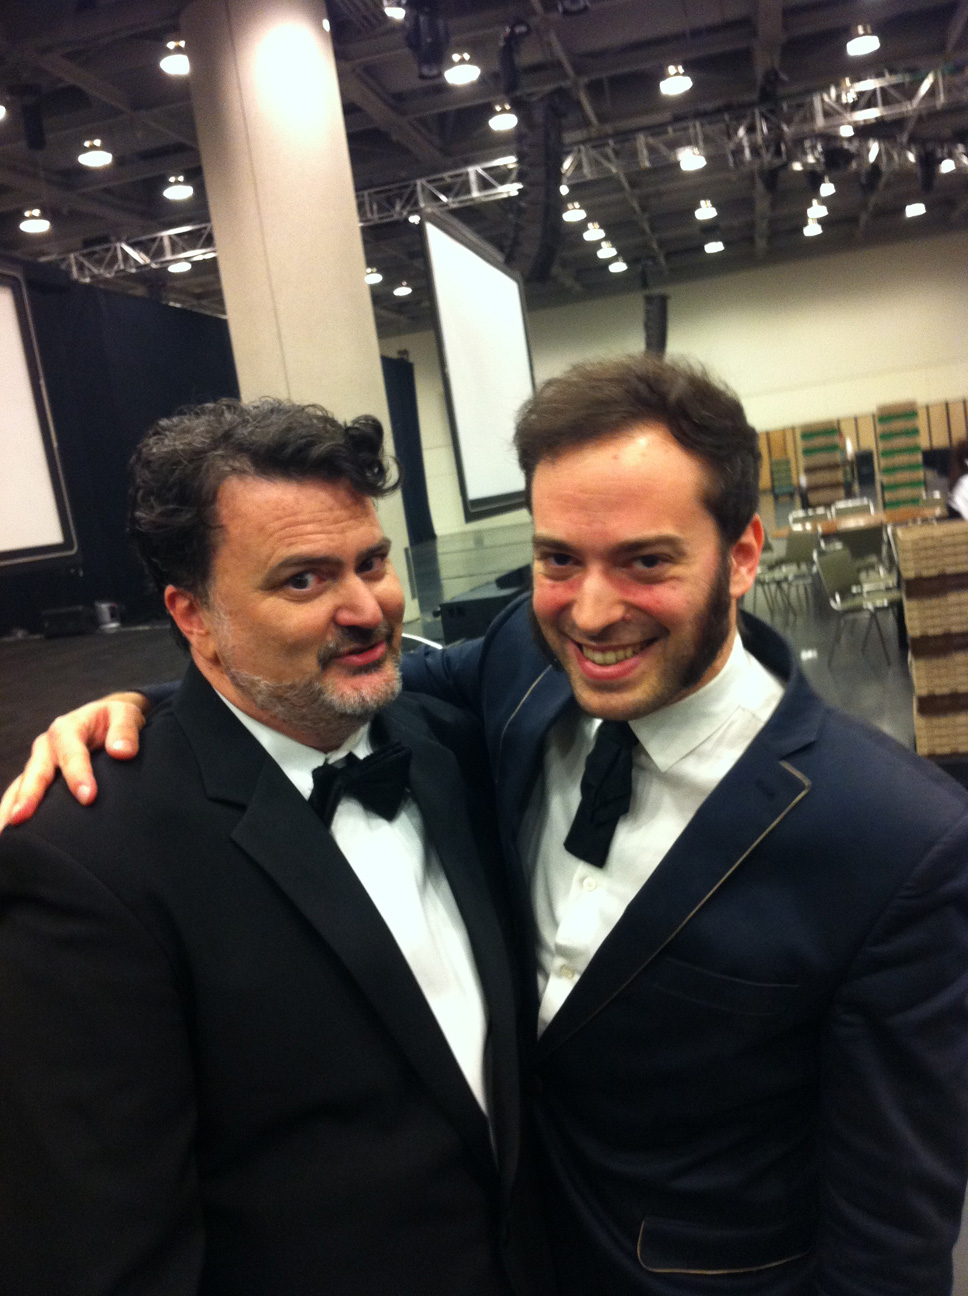  Meeting your hero Tim Schafer on Monday: utterly amazing. Being presented three awards by him on the Wednesday: priceless. 